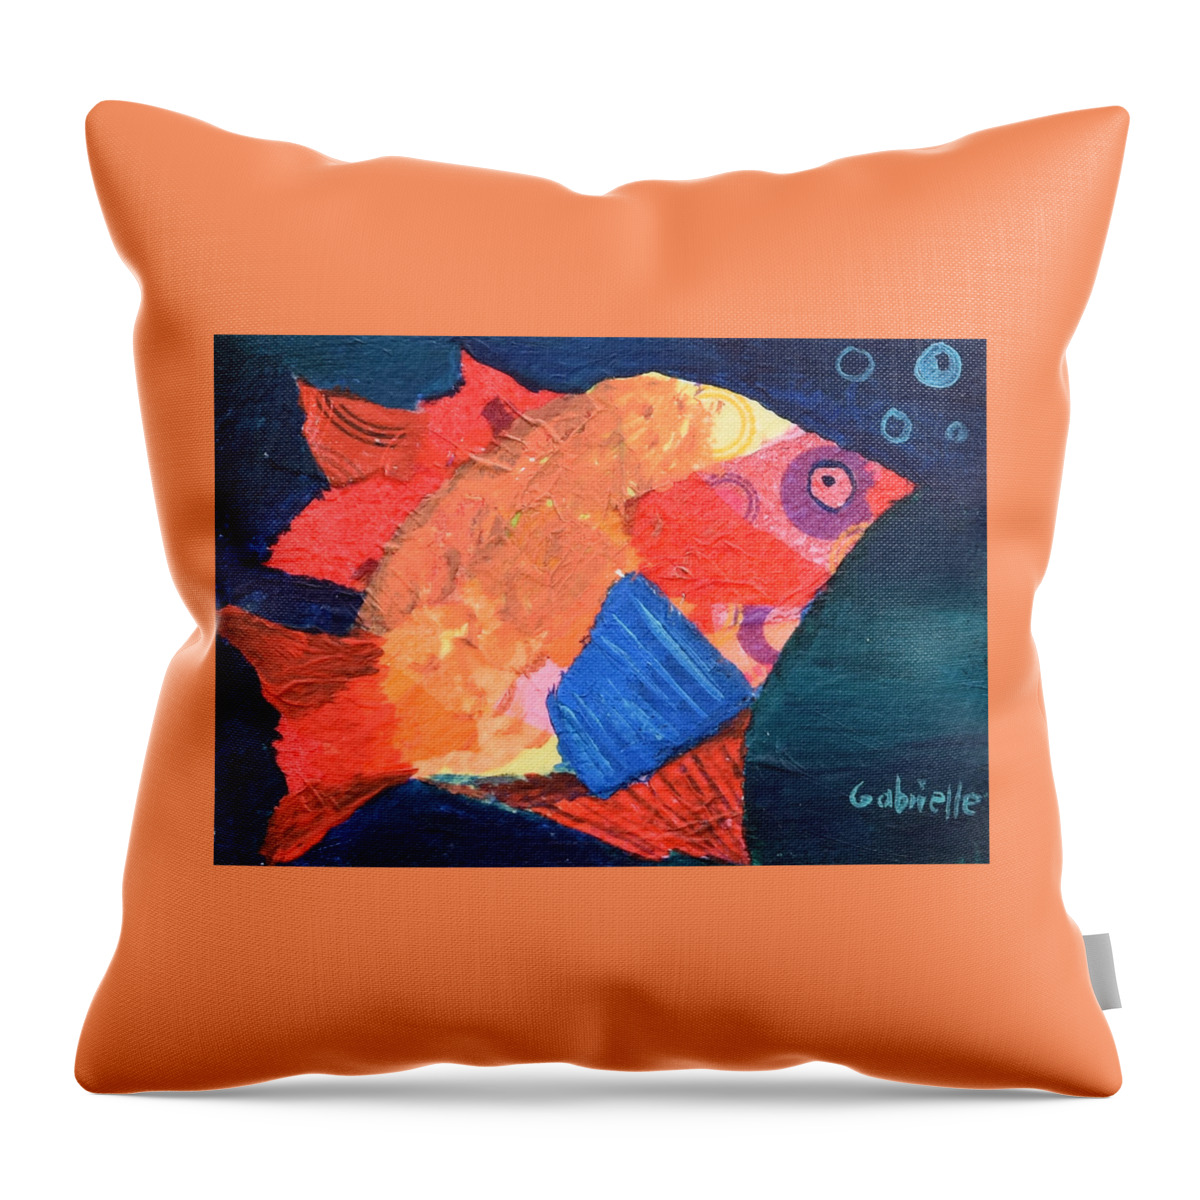 Fish Throw Pillow featuring the mixed media Funny Fish by Gabrielle Munoz